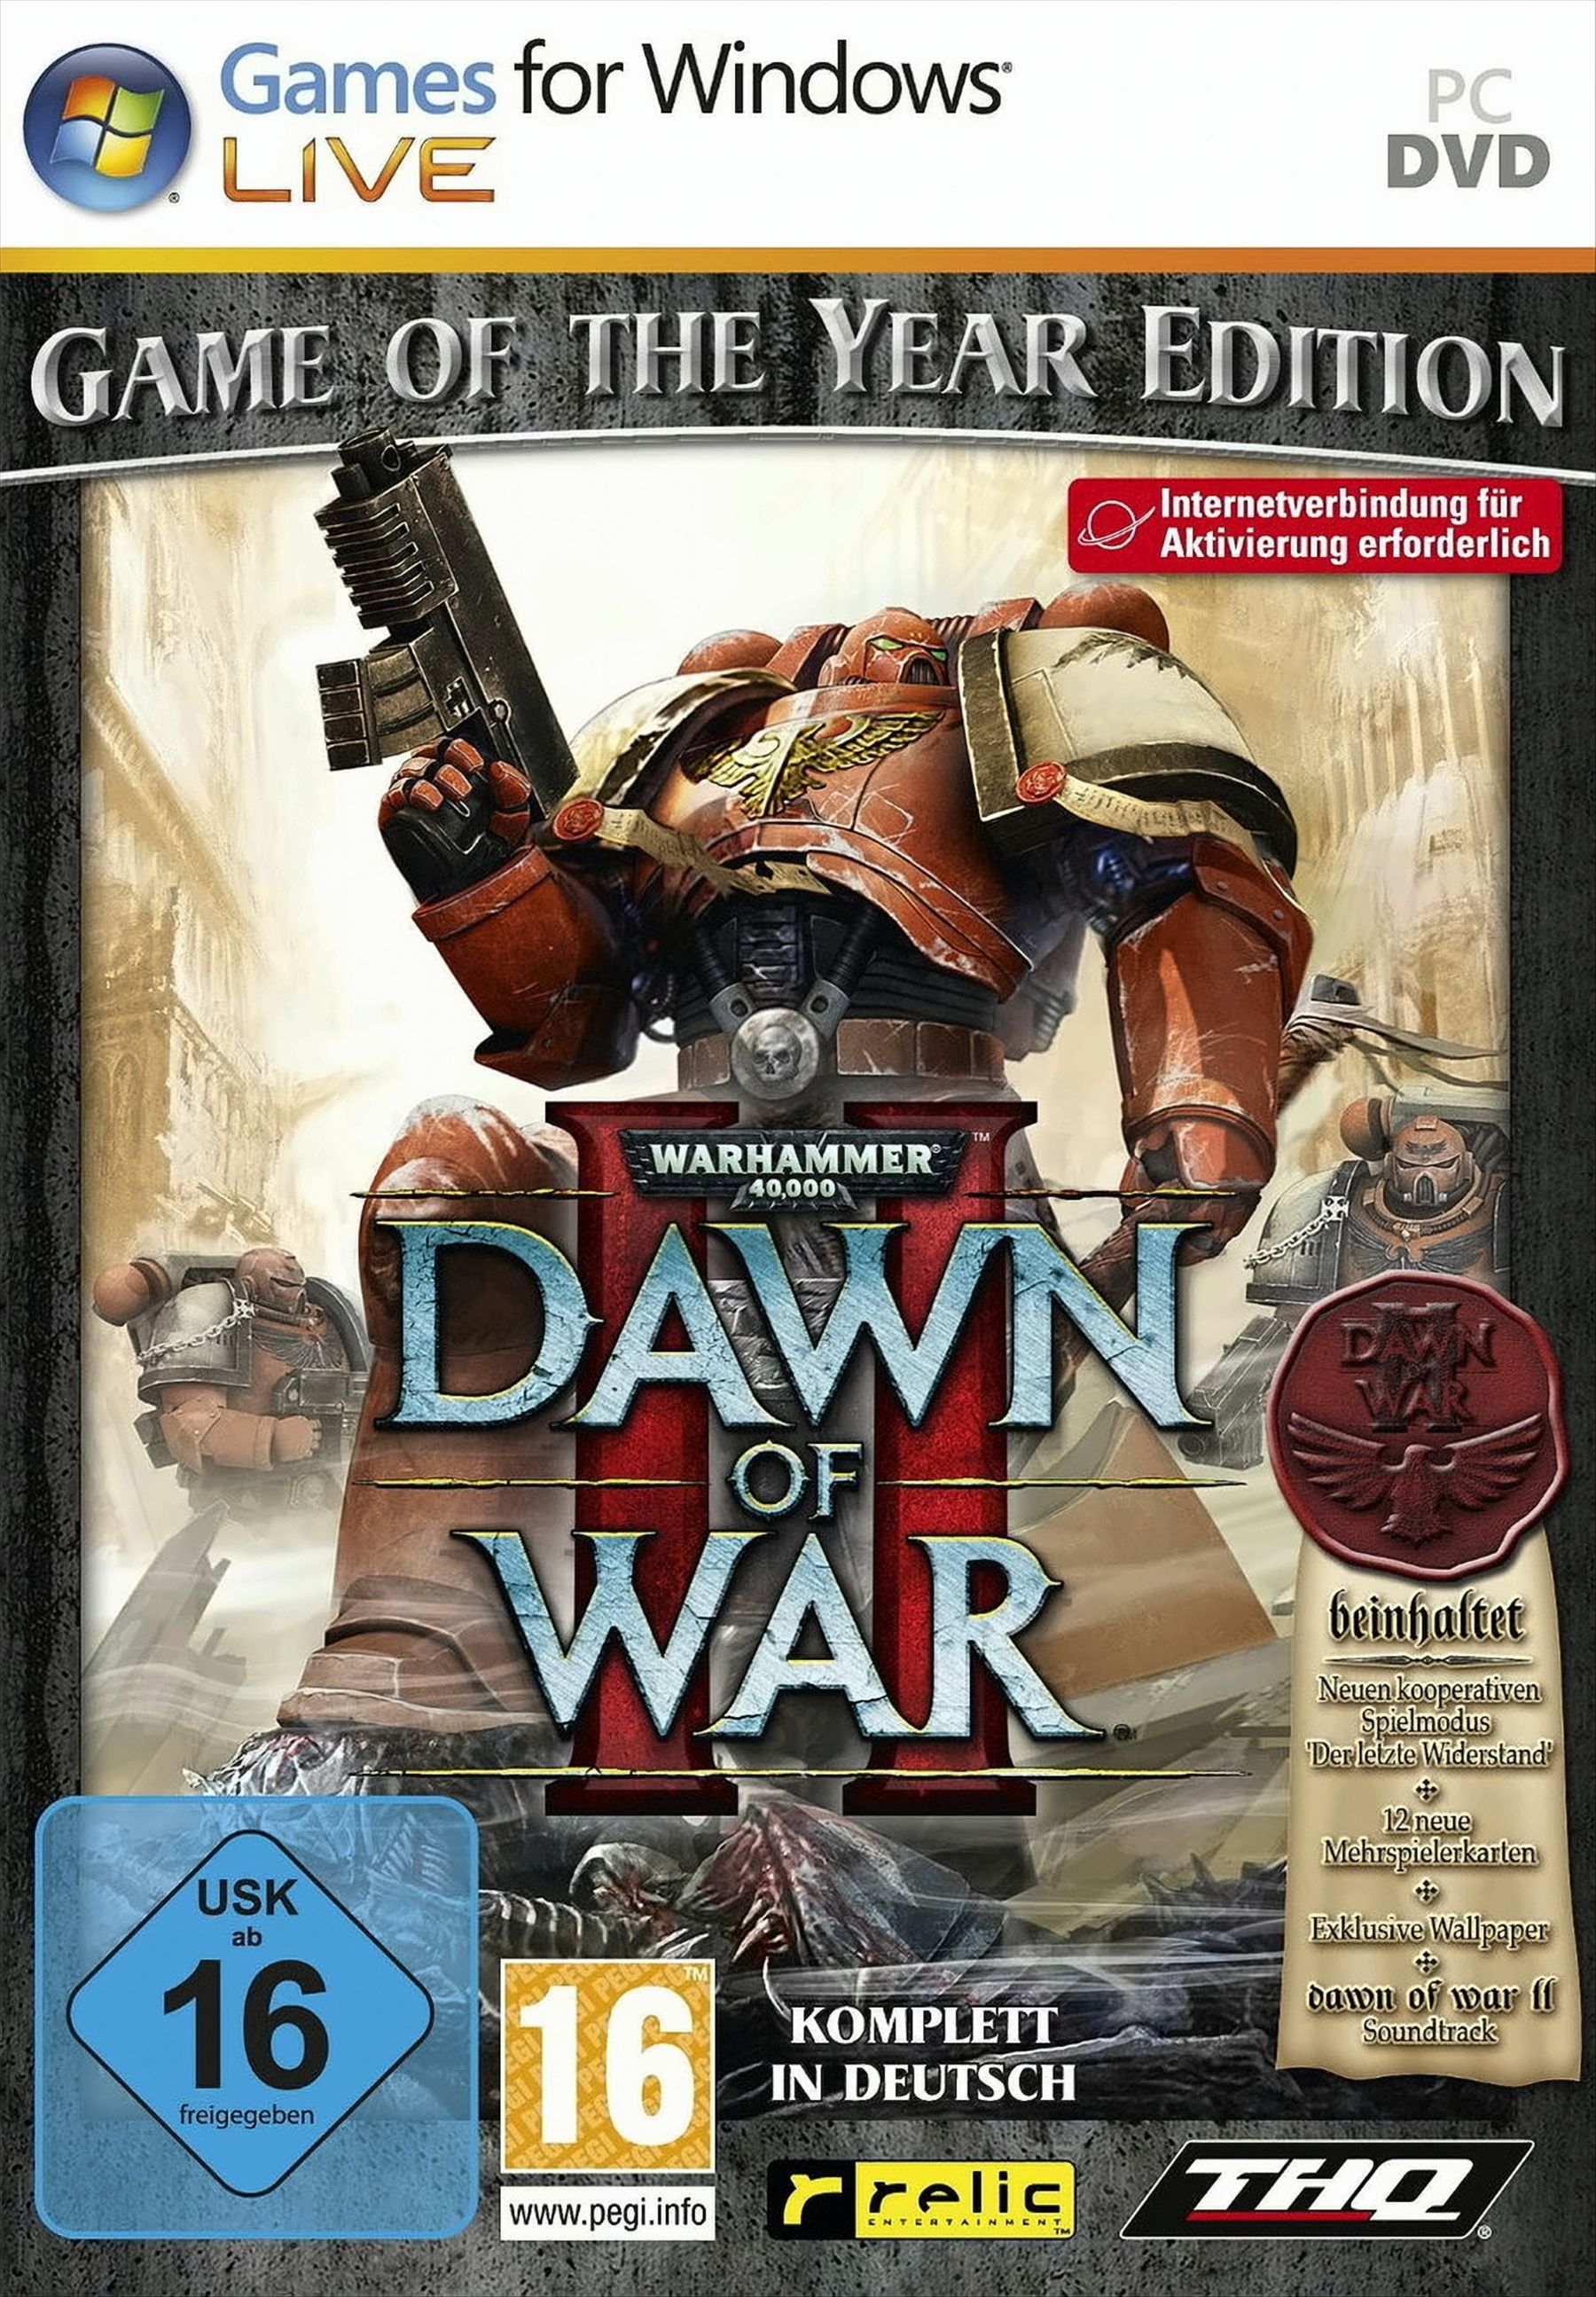 Warhammer 40,000: Dawn of Game War Edition - II Year [PC] of the 